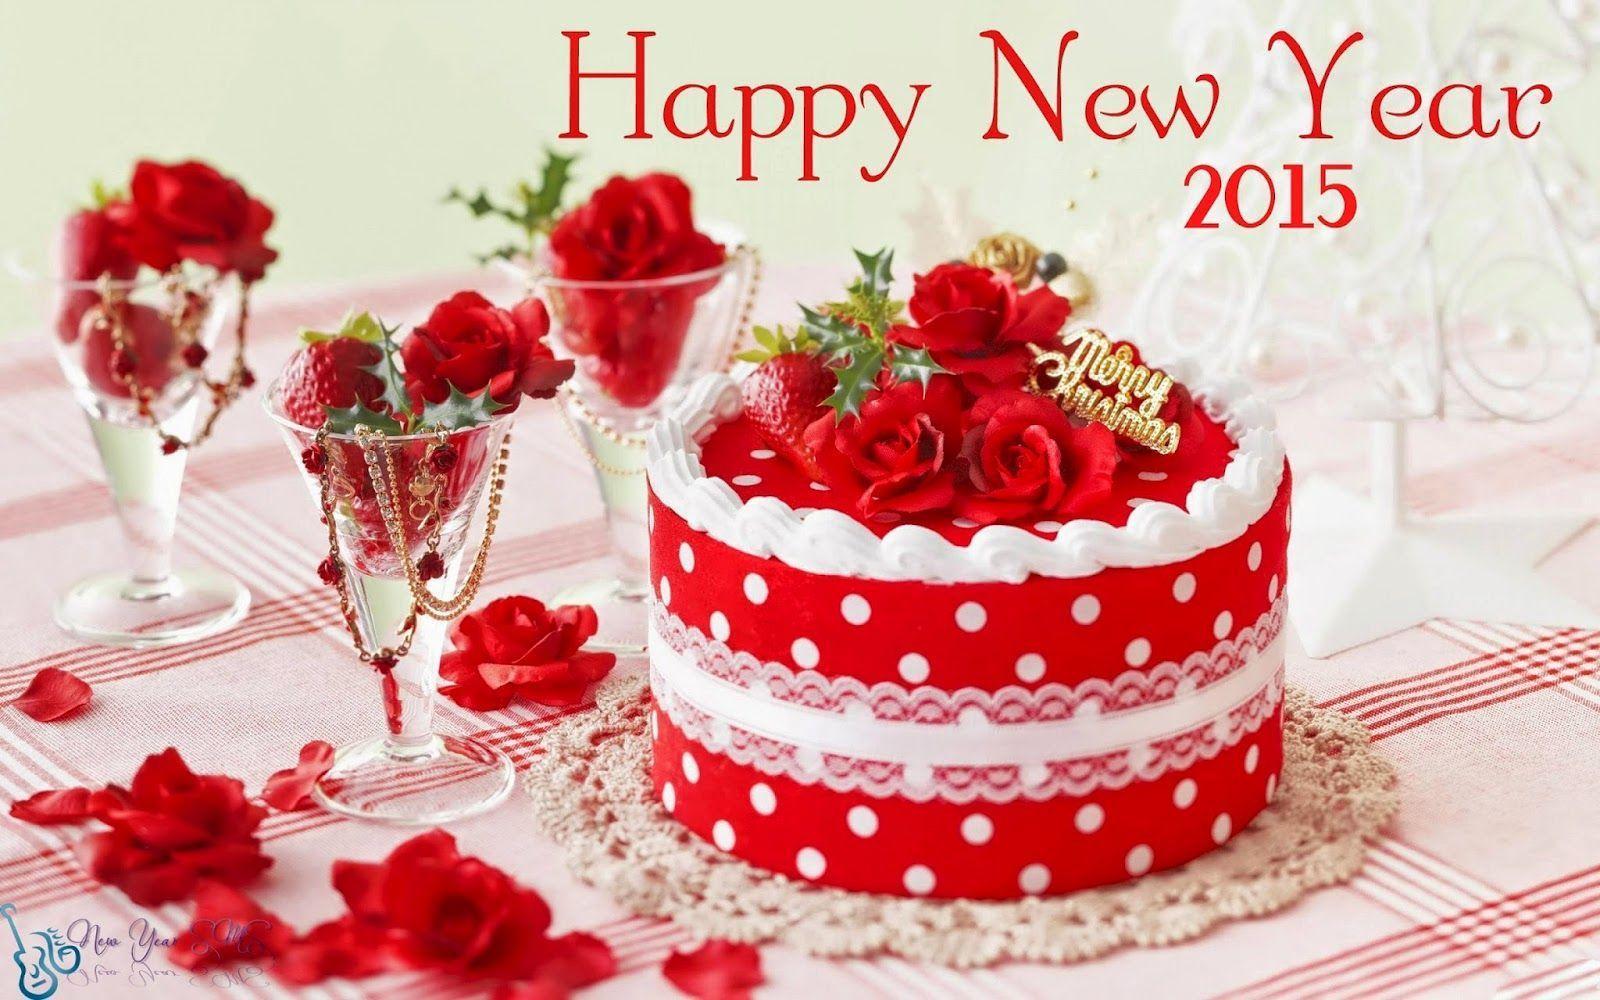 Happy New Year Image Free Download: HD Background Wallpaper